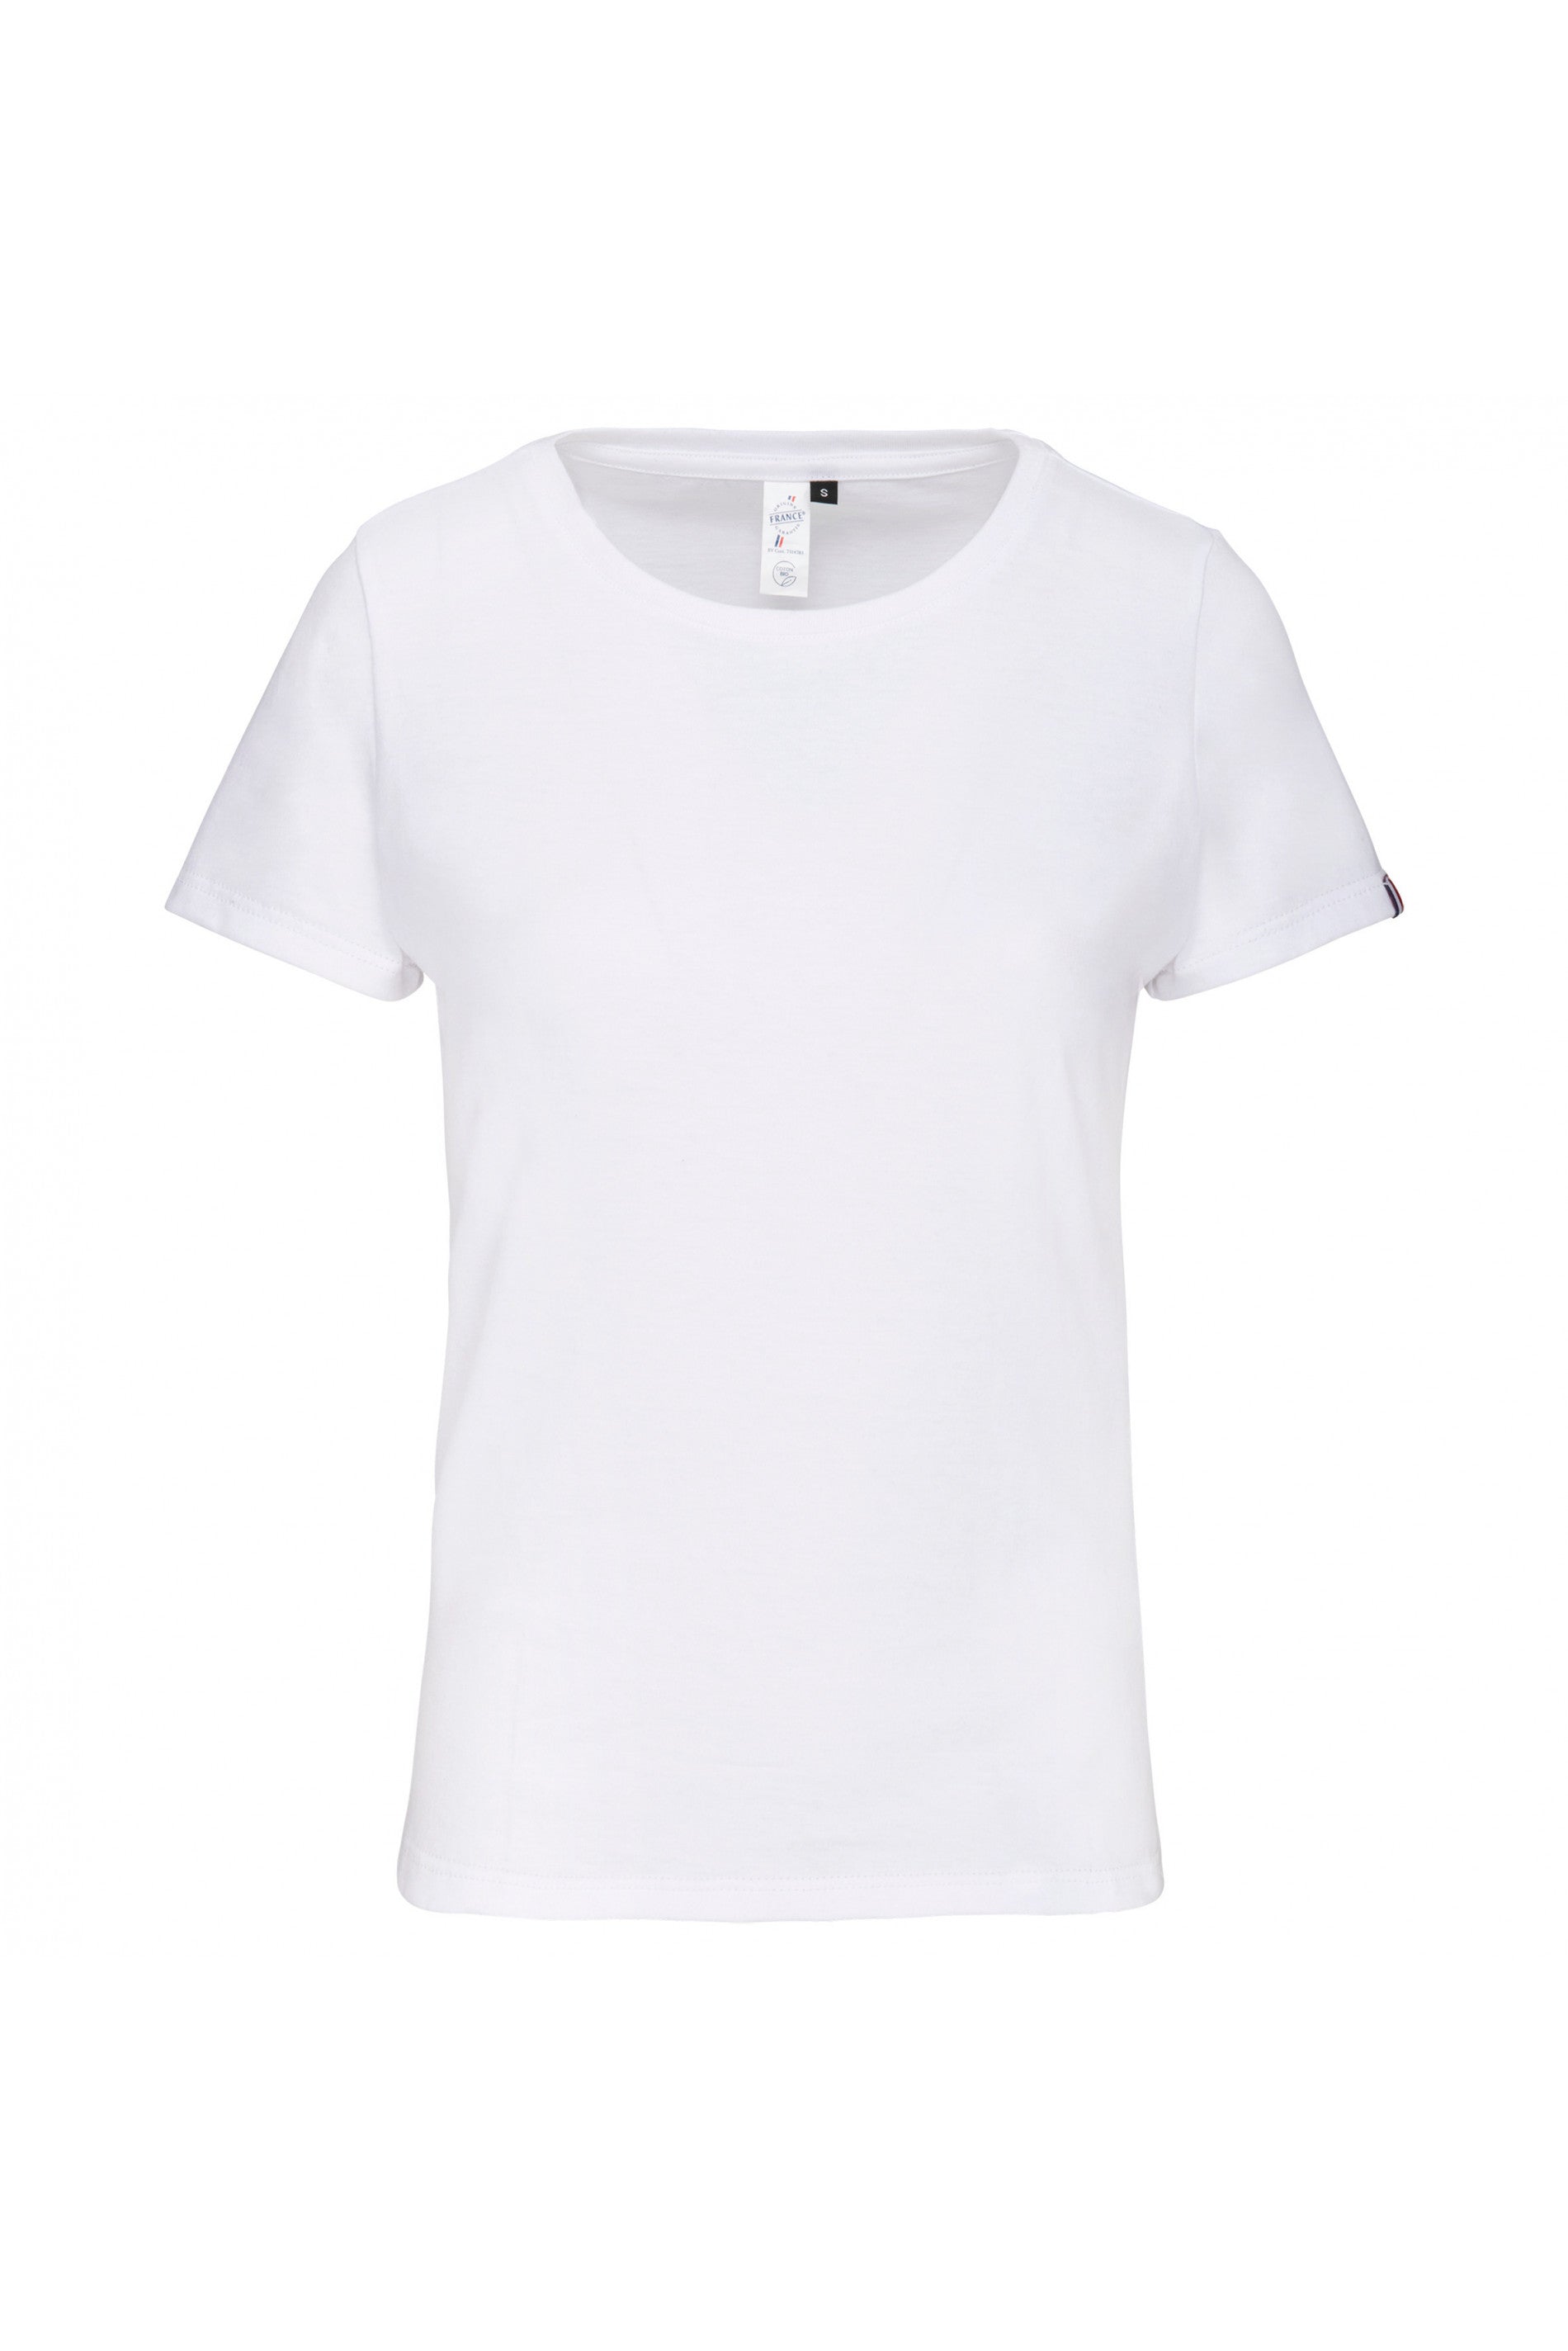 T-Shirt MADE IN FRANCE - Femme